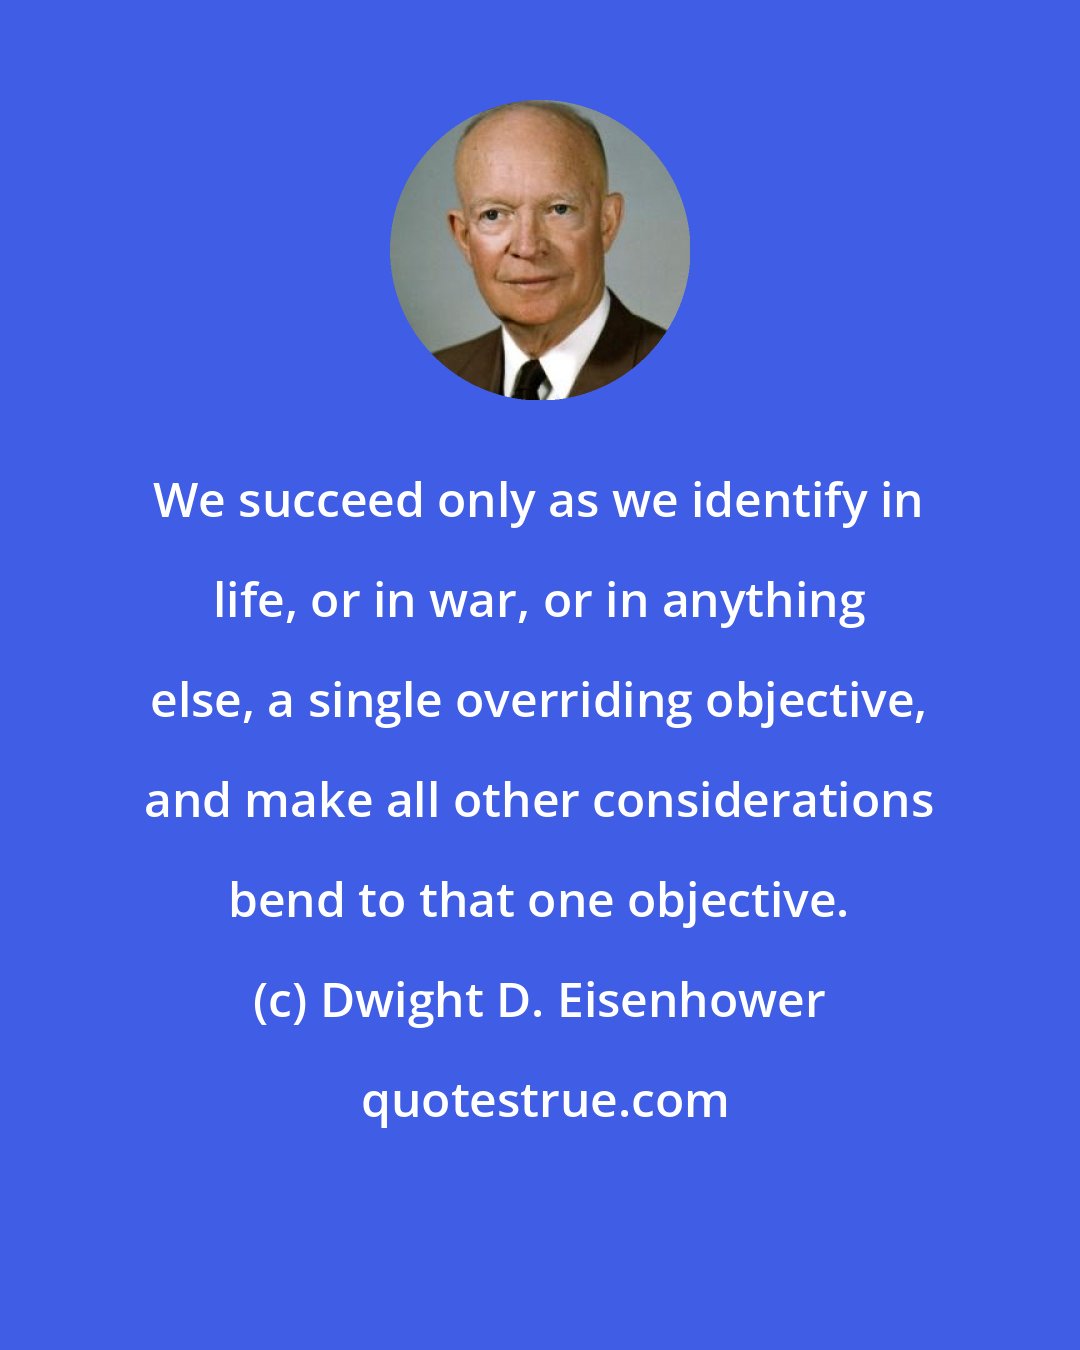 Dwight D. Eisenhower: We succeed only as we identify in life, or in war, or in anything else, a single overriding objective, and make all other considerations bend to that one objective.